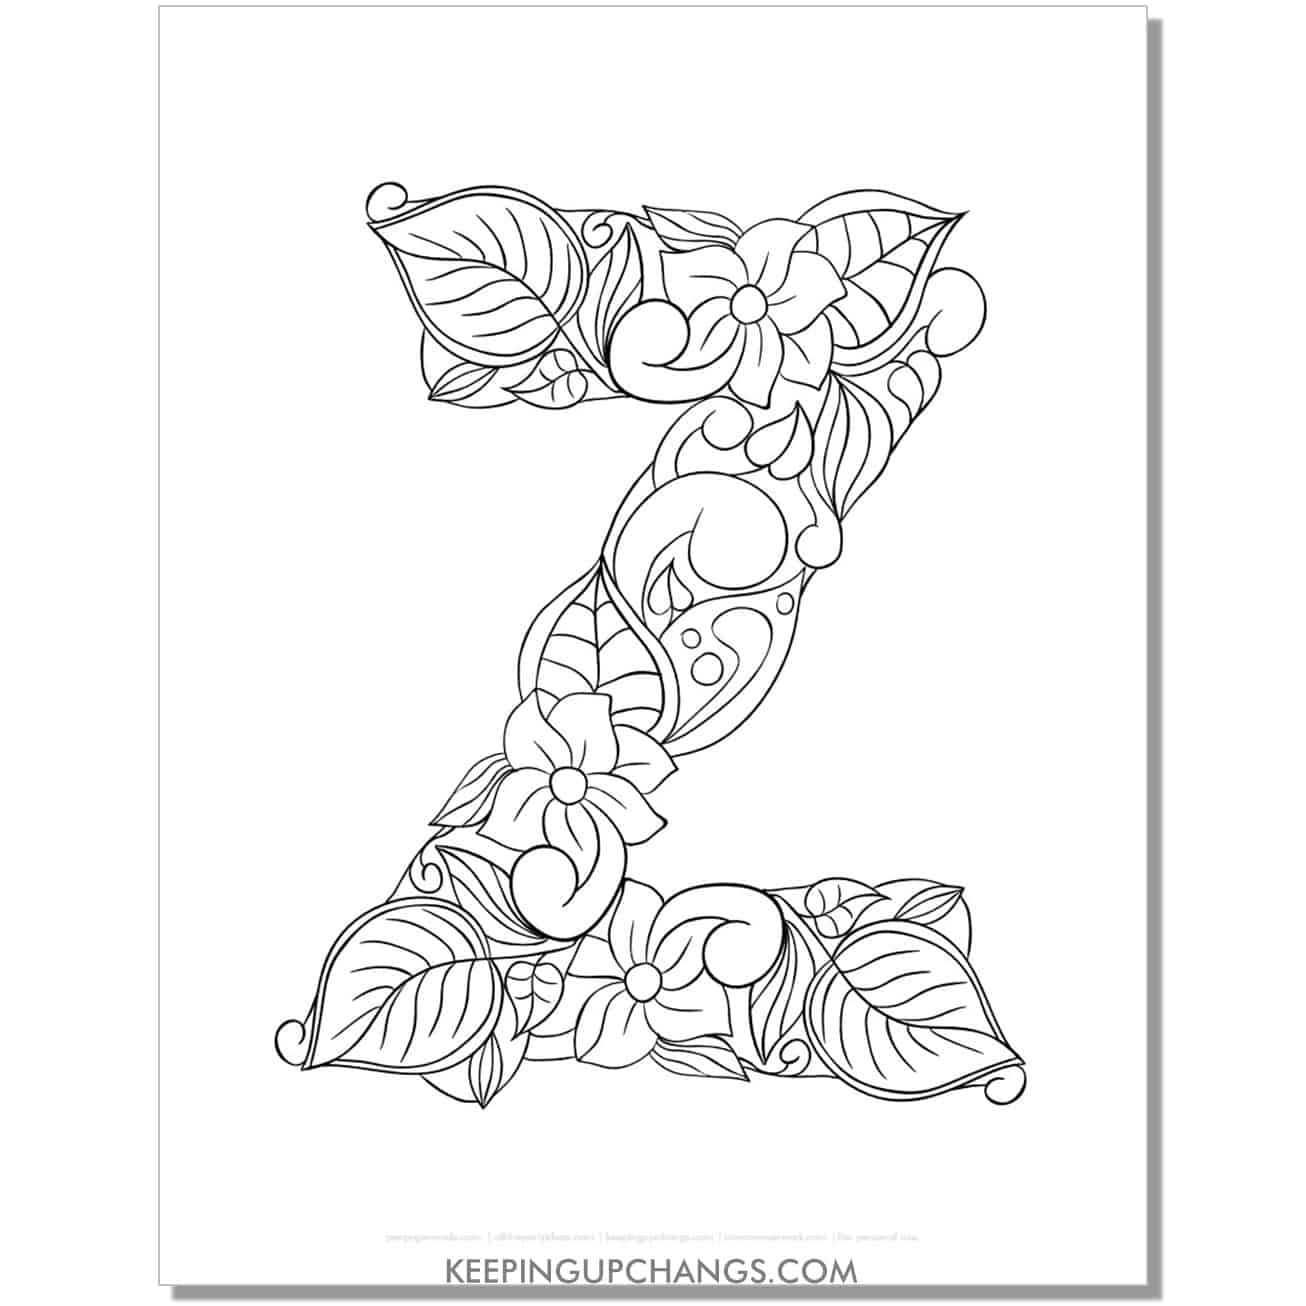 free abc z to color, complicated mandala zentangle for adults.